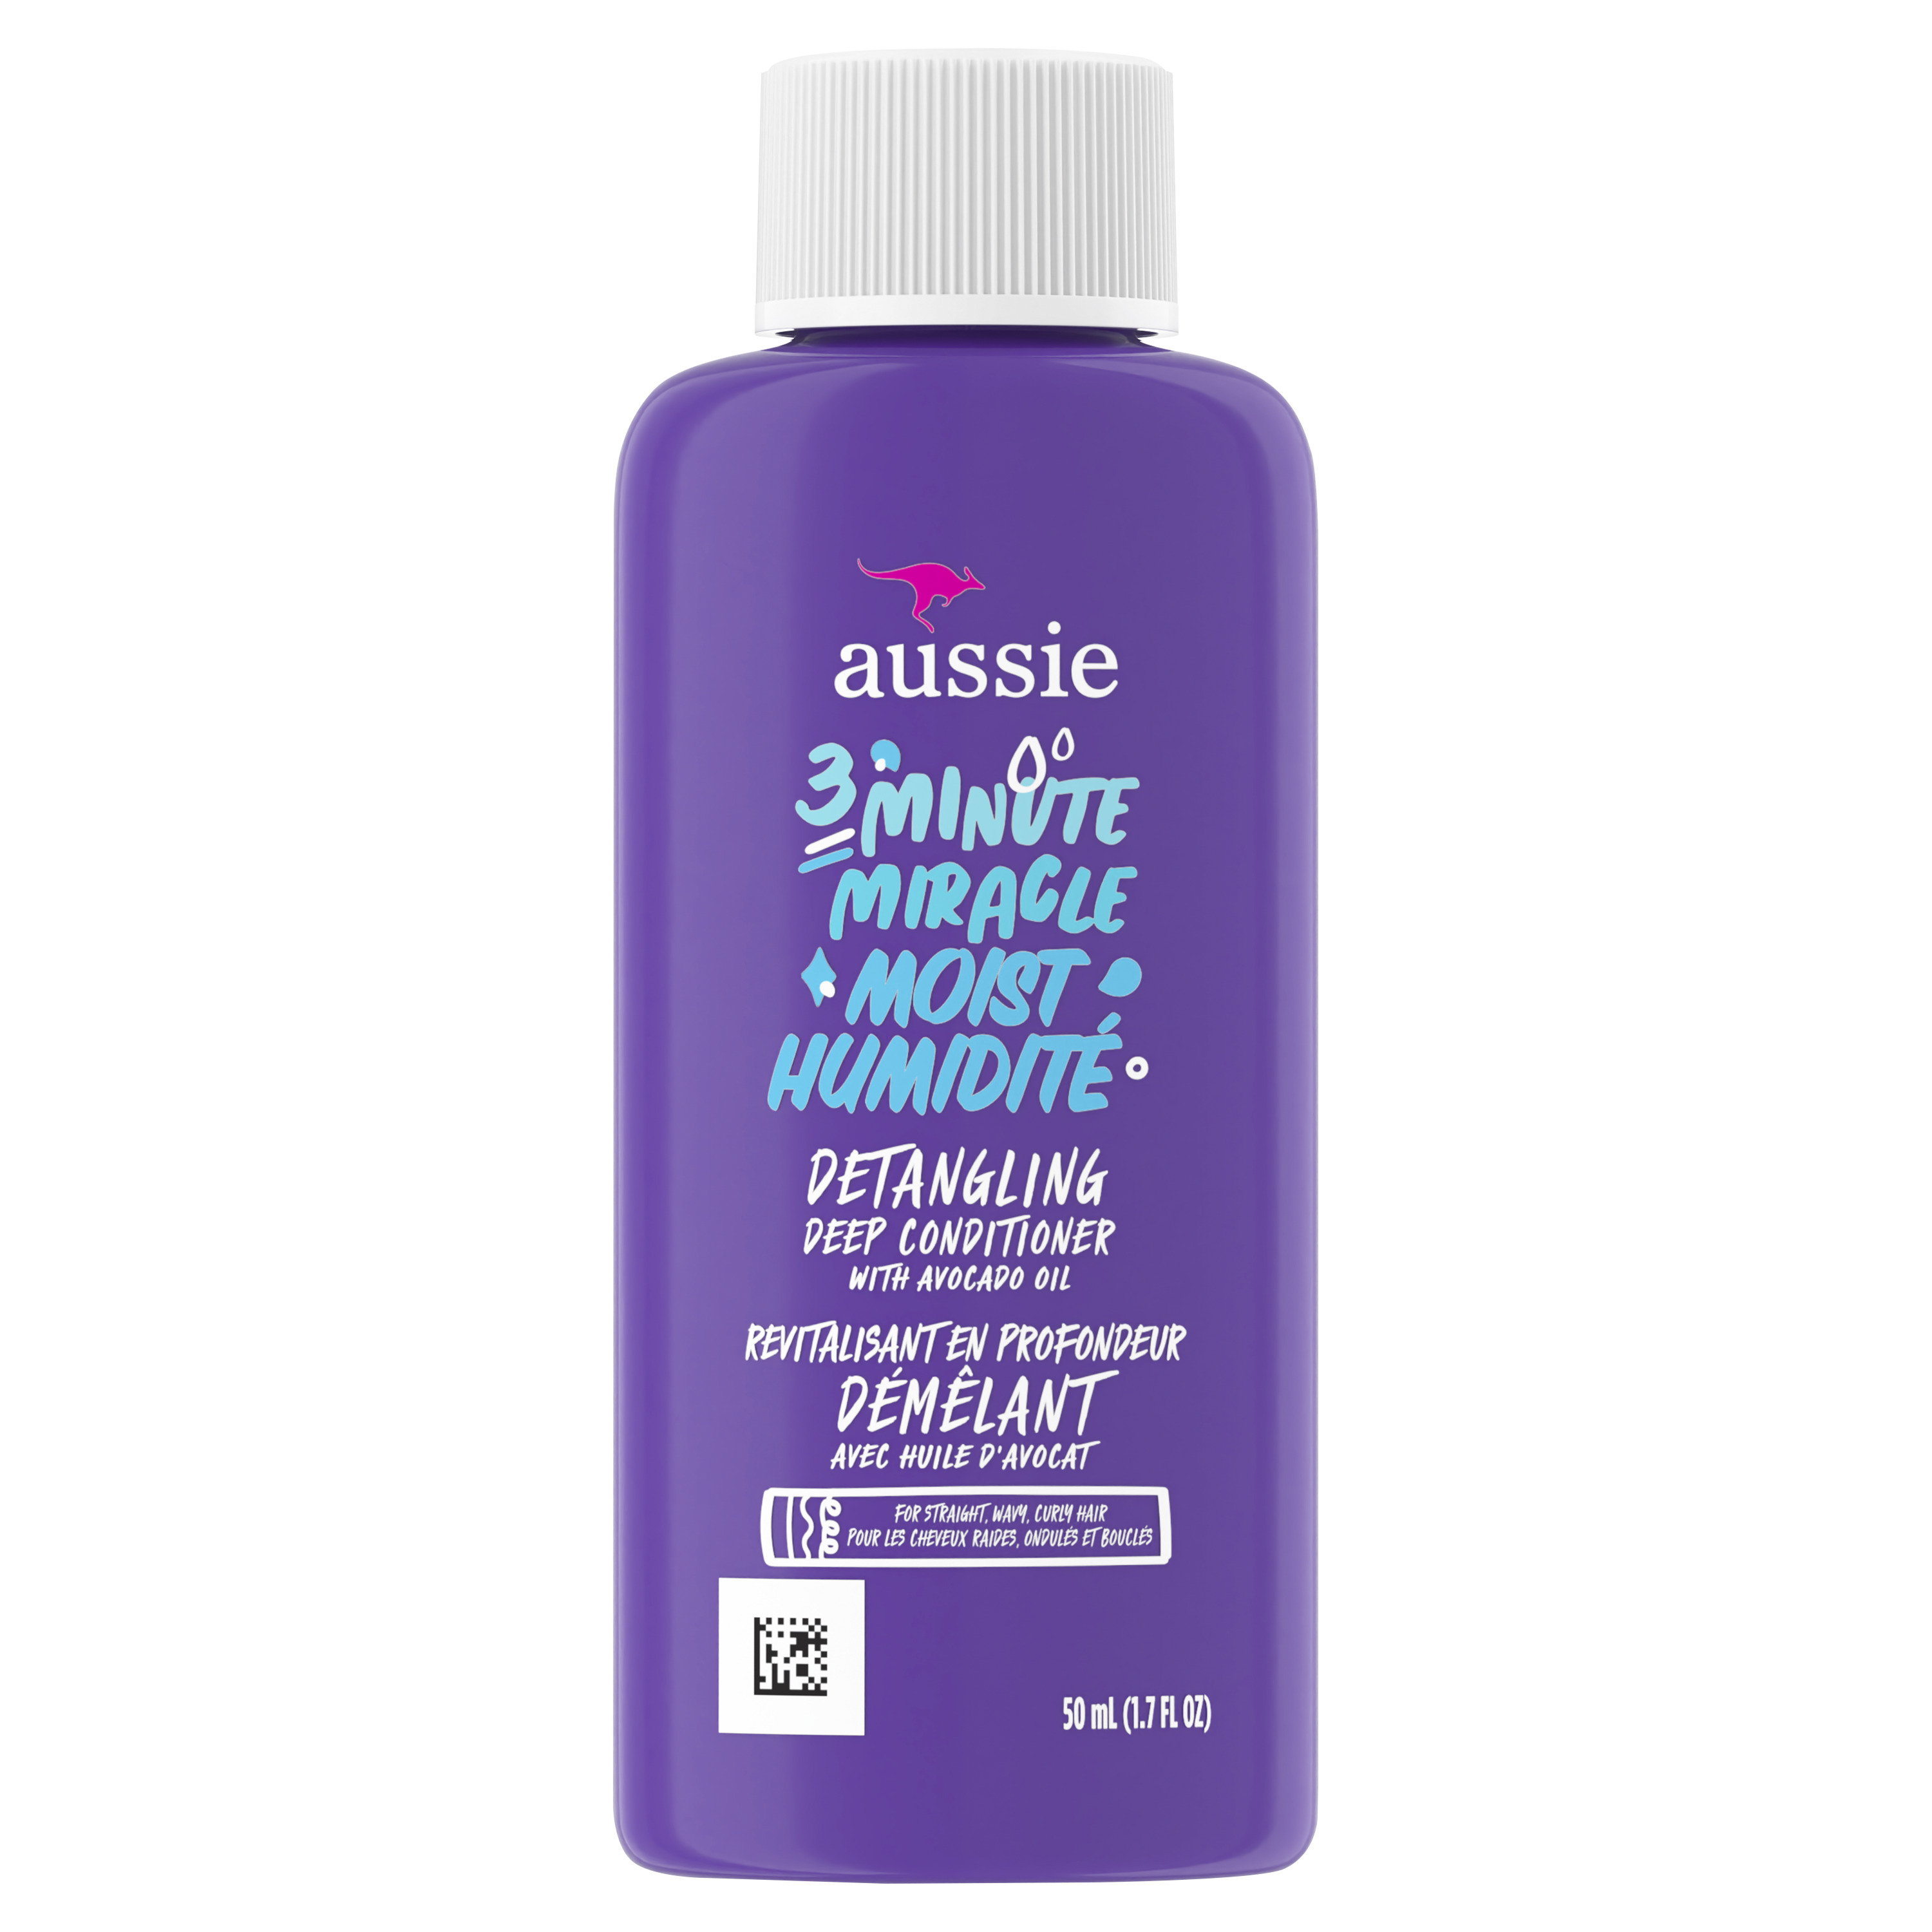 Aussie Miracle Moist 3 Minute Miracle Deep Conditioner with Avocado, Paraben Free, For All Hair Types 1.7 fl oz - image 2 of 12